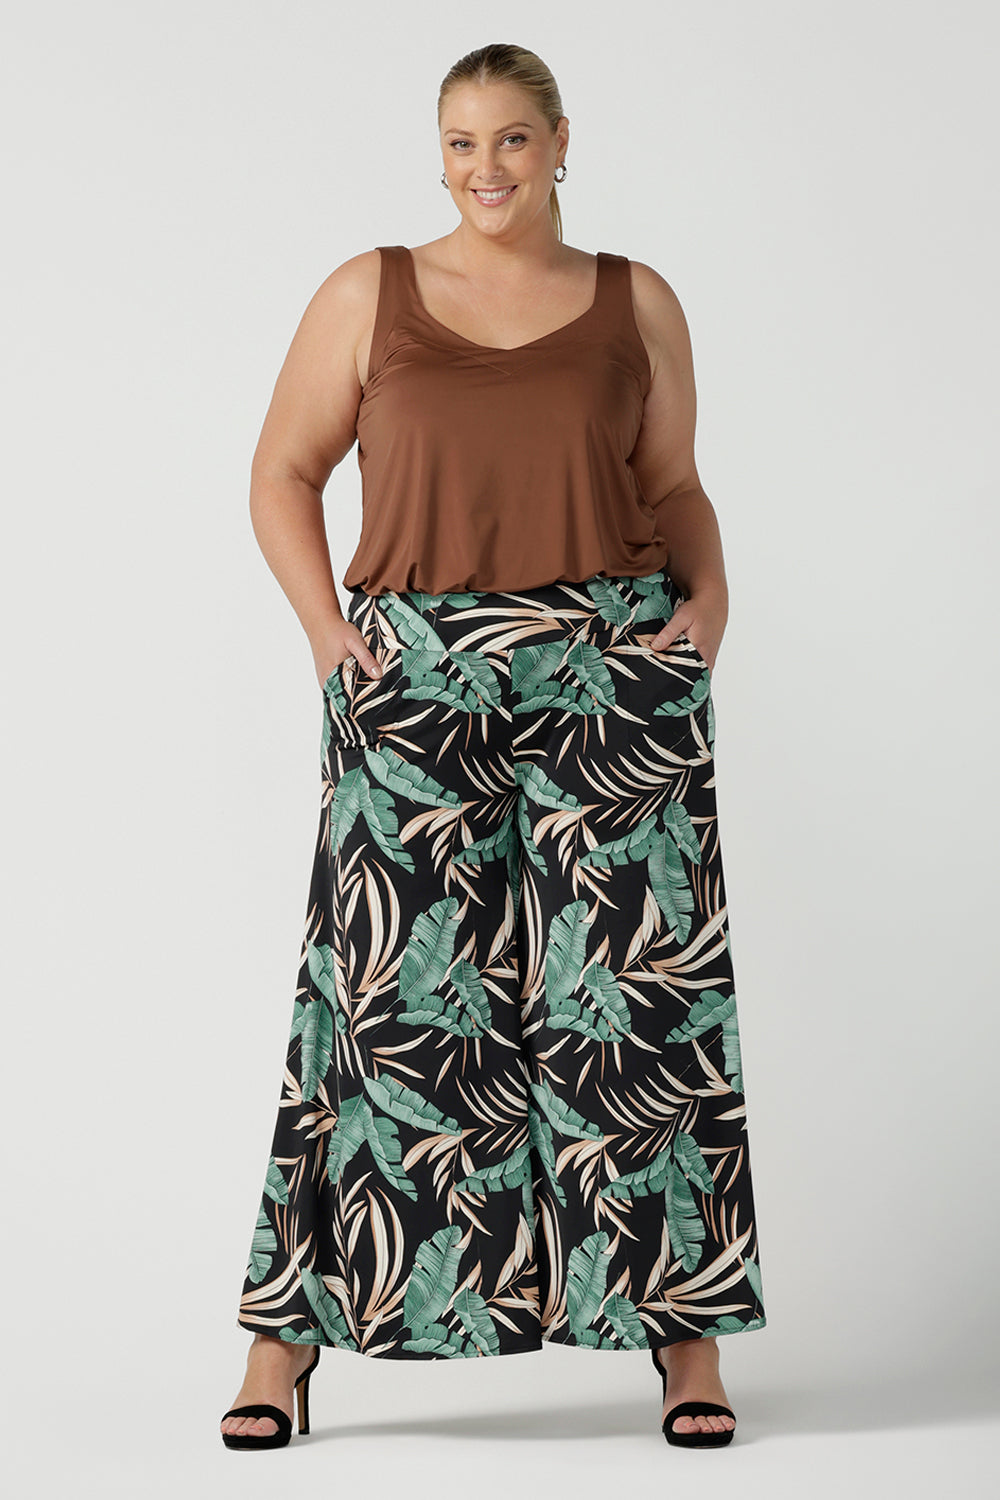 A great plus size cami top for casual weekend wear or event dressing. Eddy Cami in Clay has wide shoulder straps, a soft V-neckline and loose fitting slinky jersey body. Made in Australia by Australian fashion brand, Leina & Fleur.